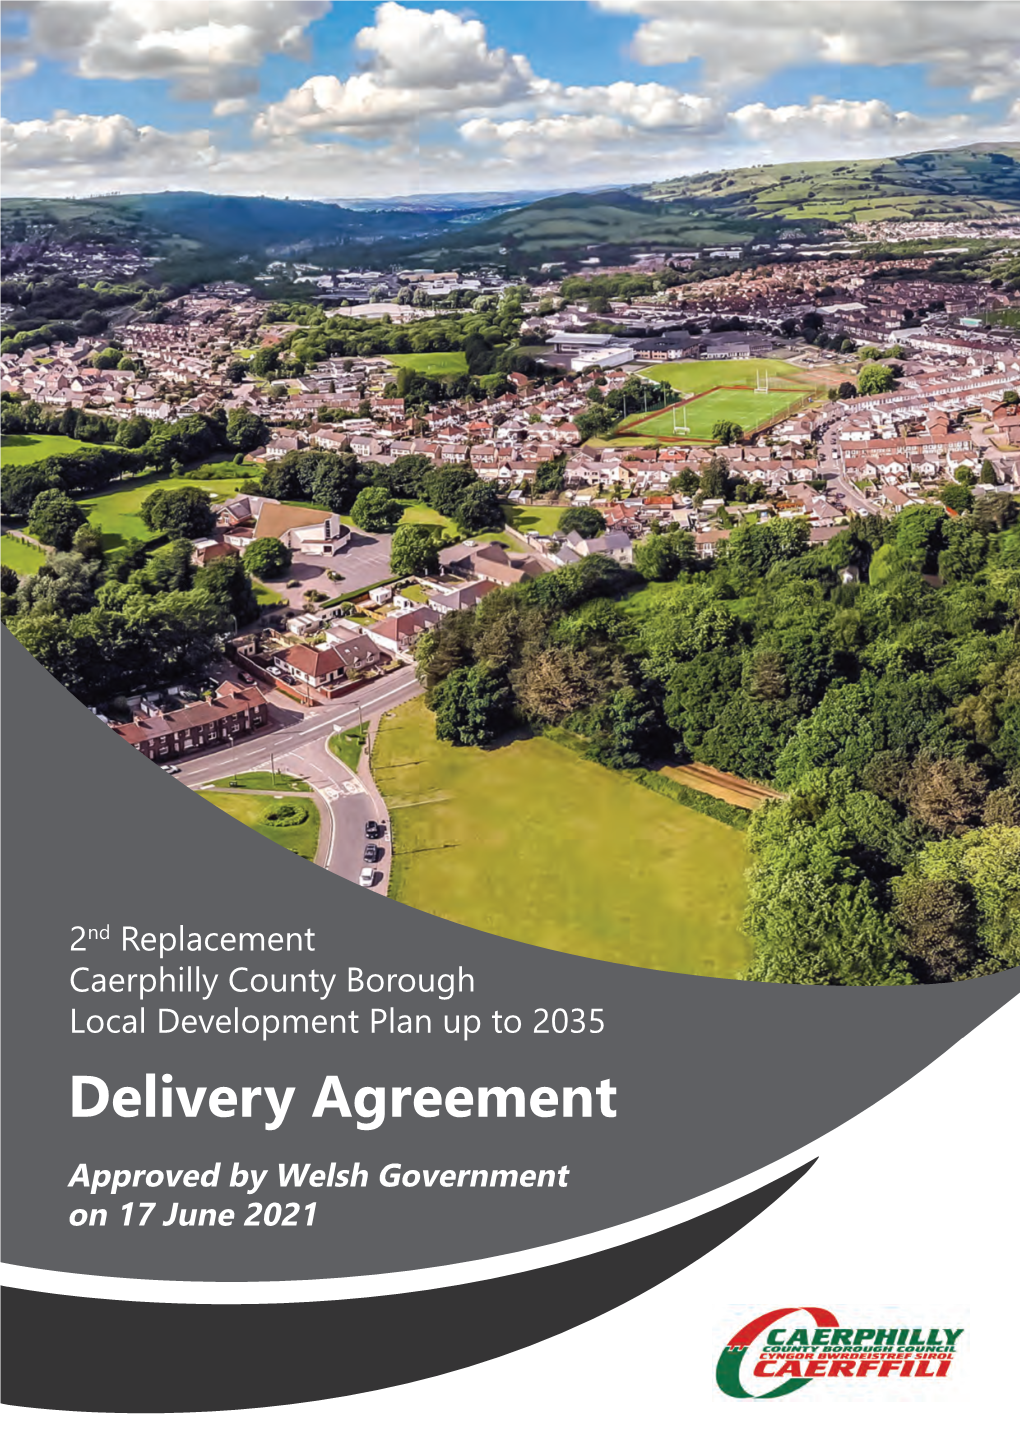 Delivery Agreement Approved by Welsh Government on 17 June 2021